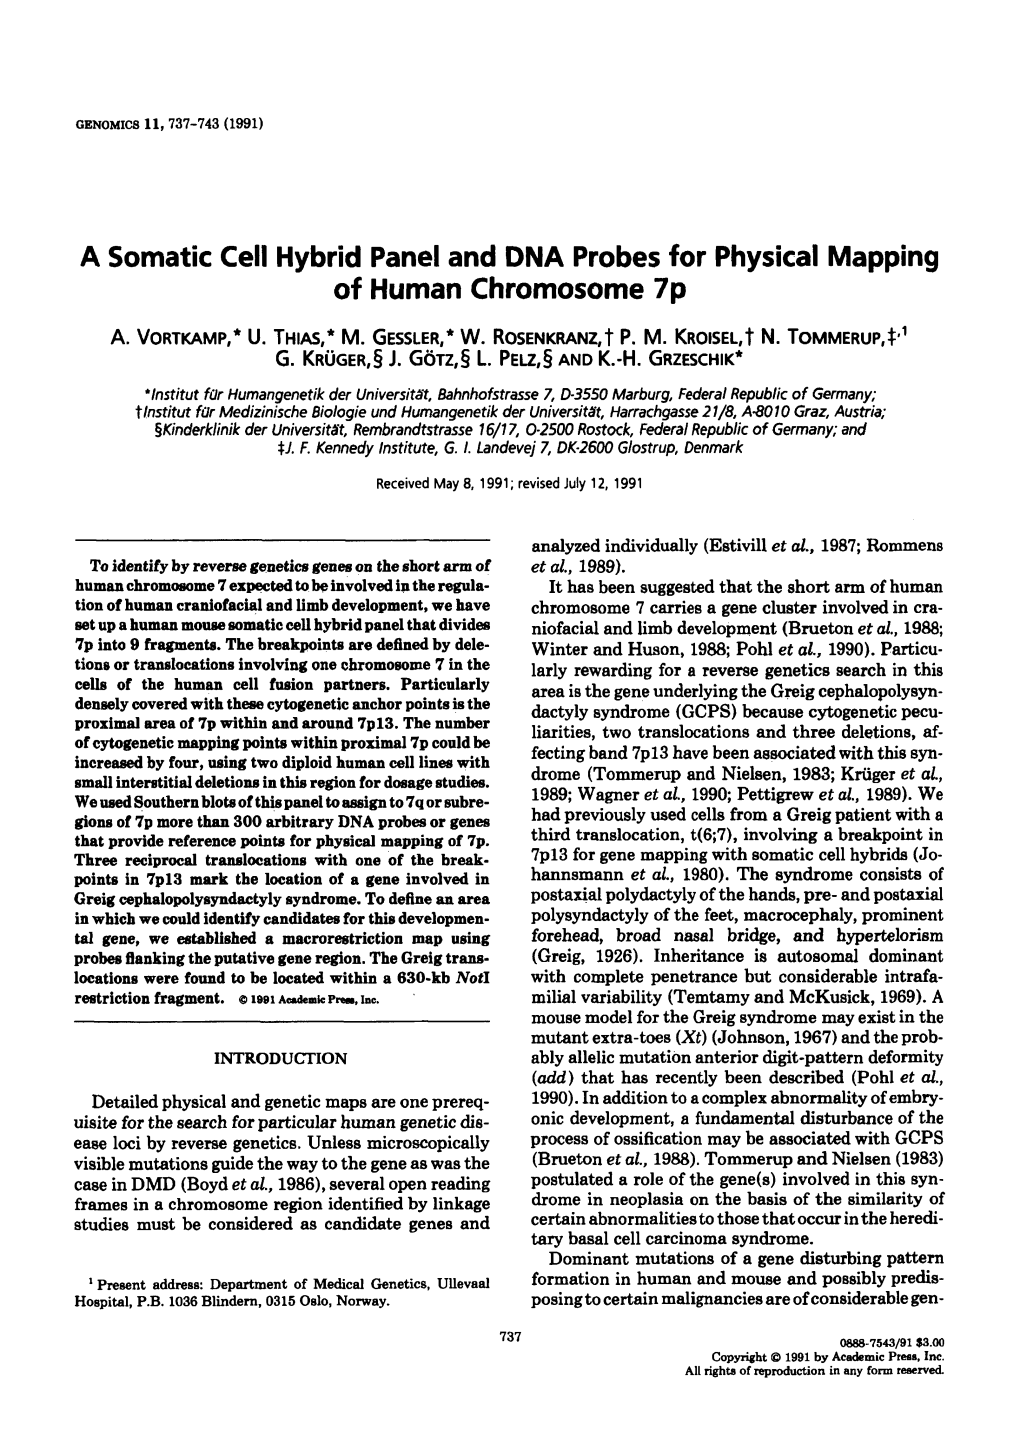 A Somatic Cell Hybrid Panel and DNA Probes for Physical Mapping of Human Chromosome 7P